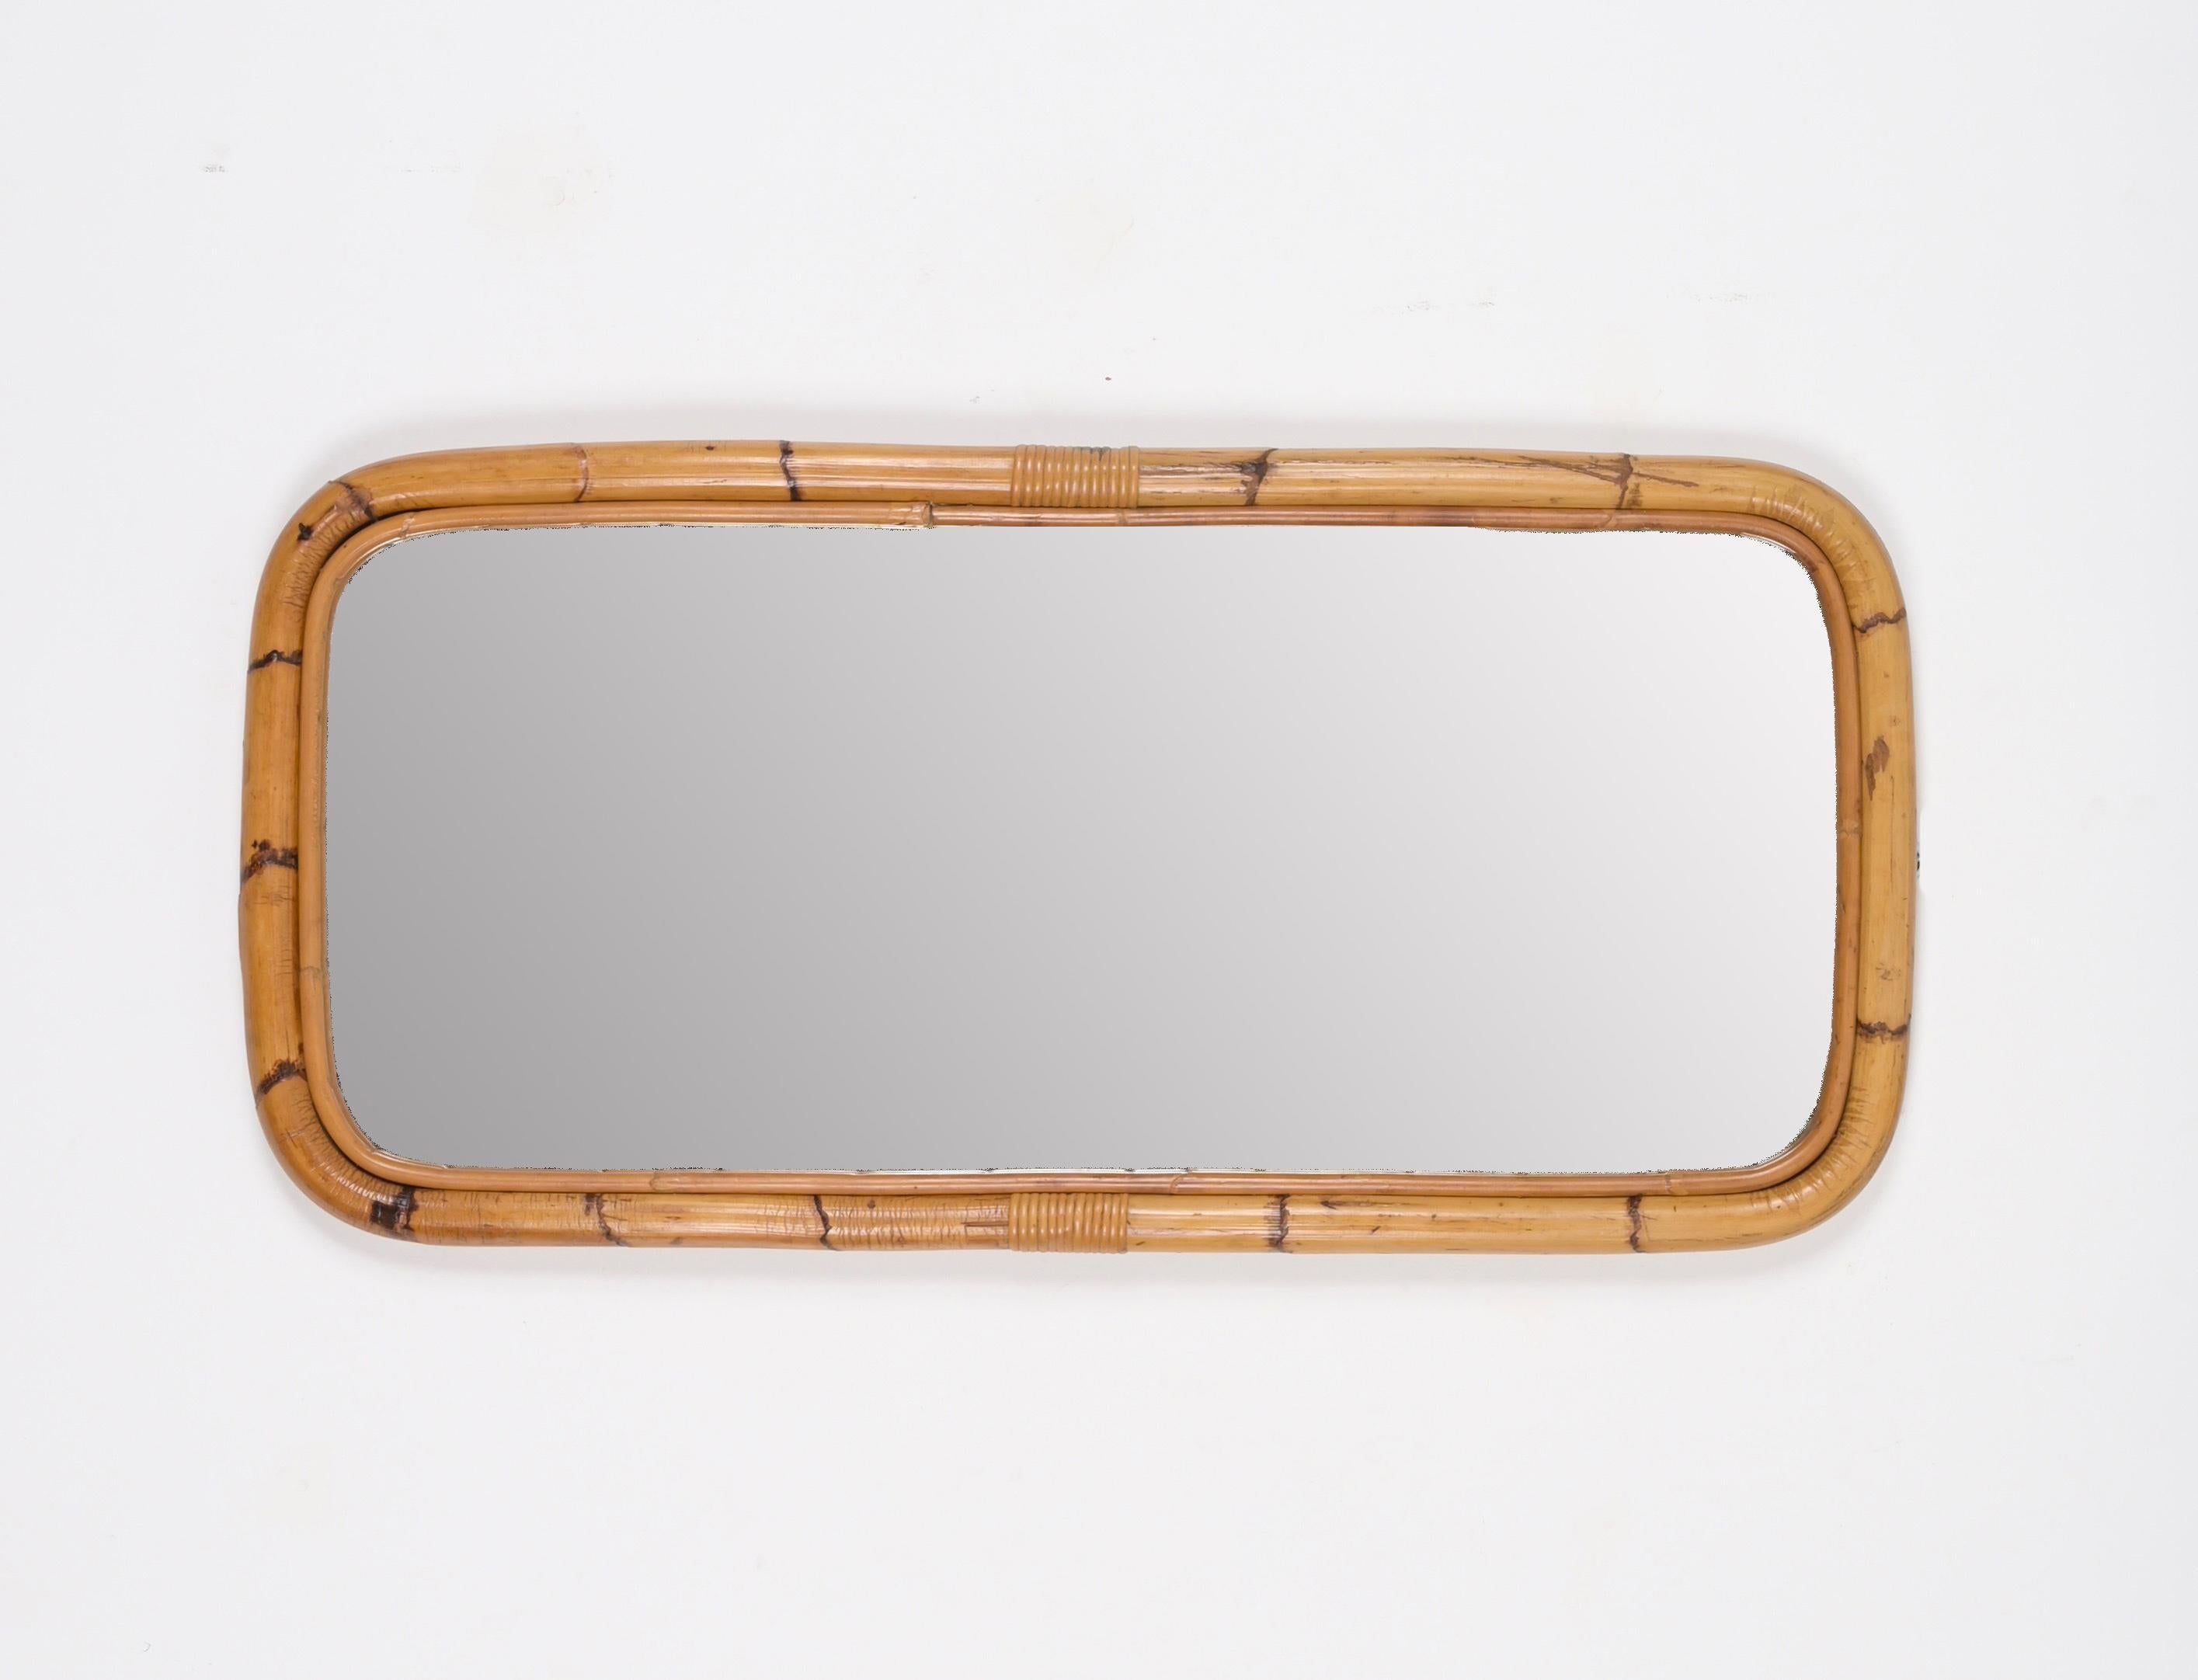 Stunning Mid-Century French Riviera style large rectangular mirror in curved bamboo and woven rattan wicker. This charming mirror was produced in Italy during the 1970s.

The mirror  has an unique design with a double frame in curved bamboo with the